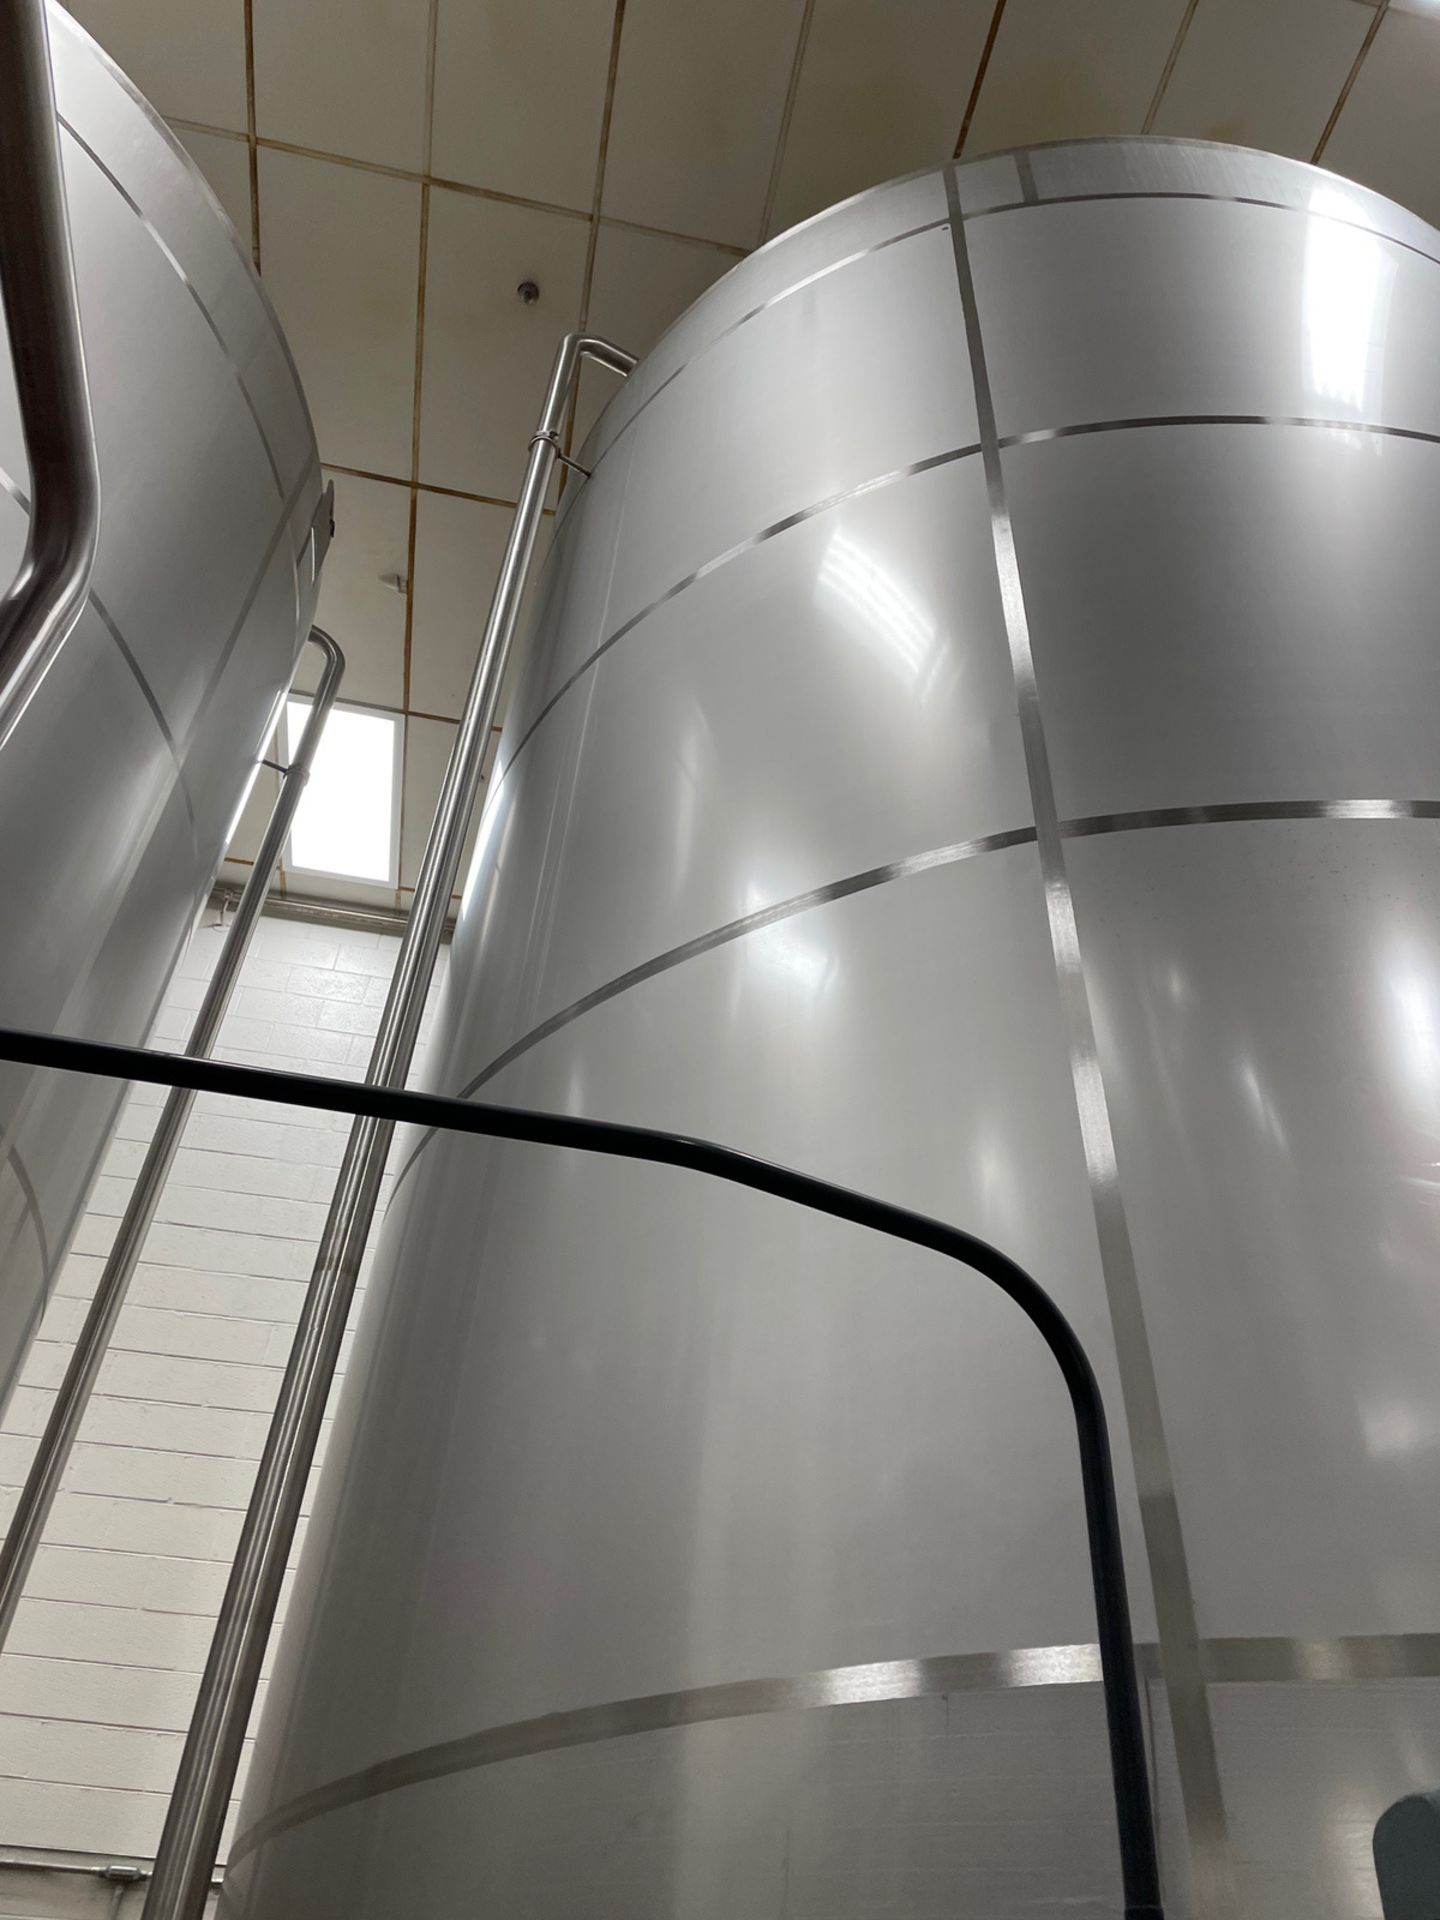 DCI 17,000 Gallon Stainless Steel Horizontal Agitated Tank, Dish Bottom, Dome Top, | Rig Fee: $6000 - Image 6 of 12